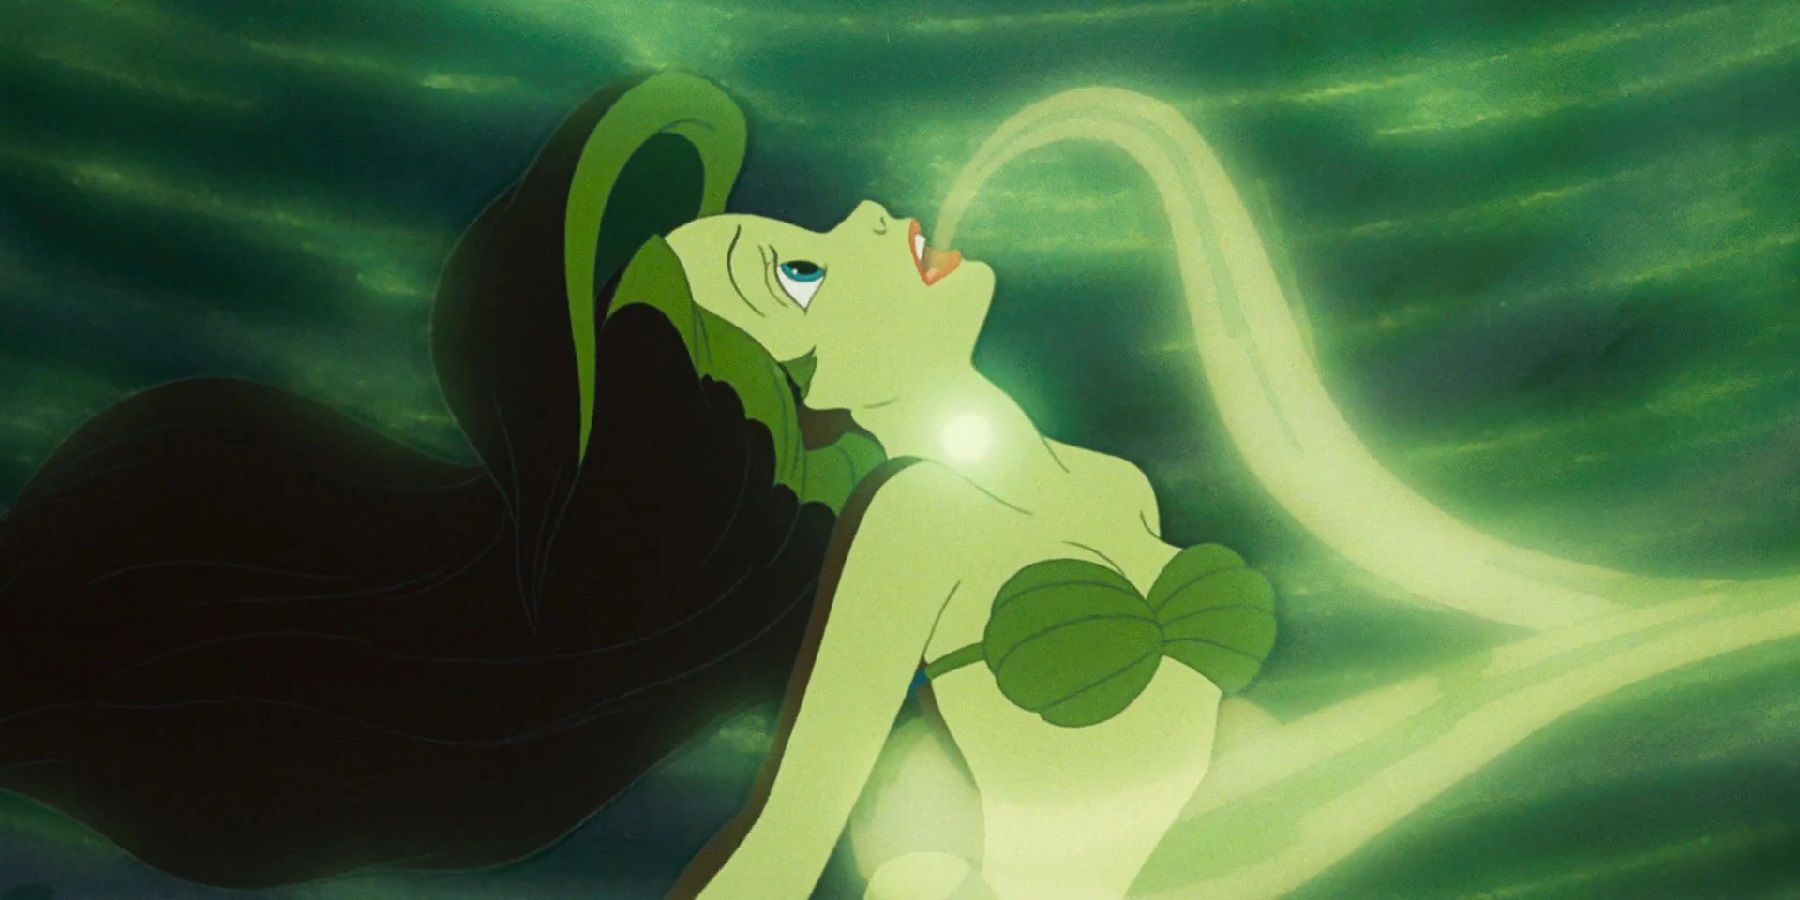 10 Lessons We Can Learn From Disney’s The Little Mermaid